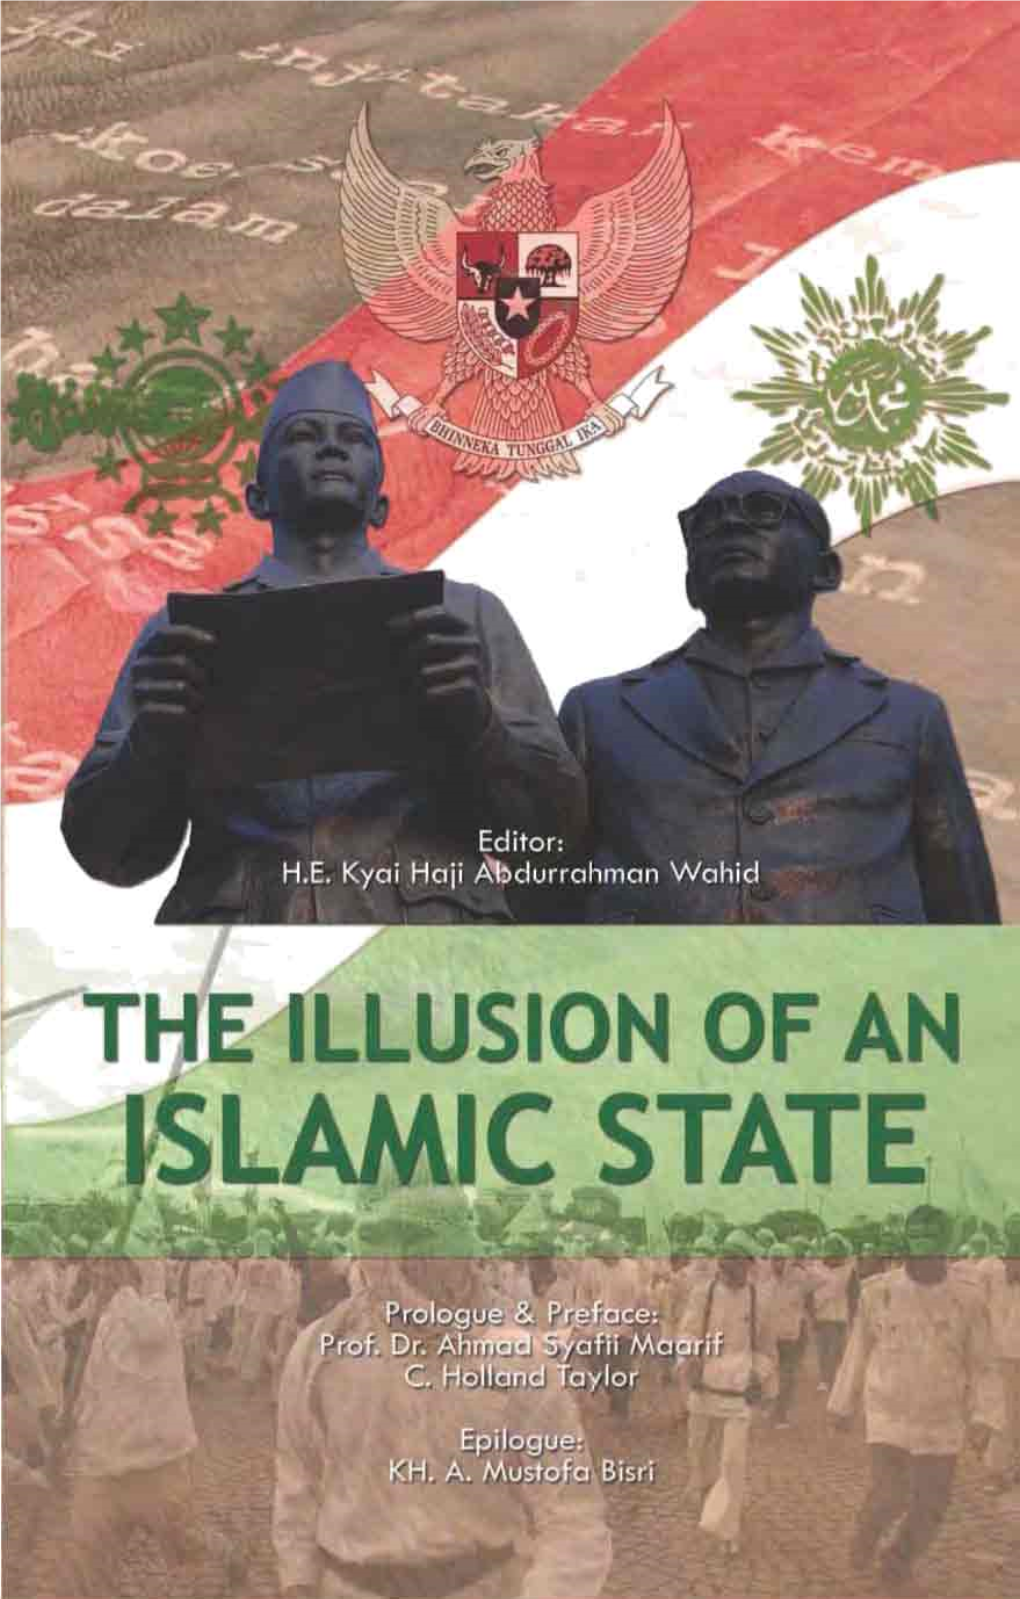 The Illusion of an Islamic State